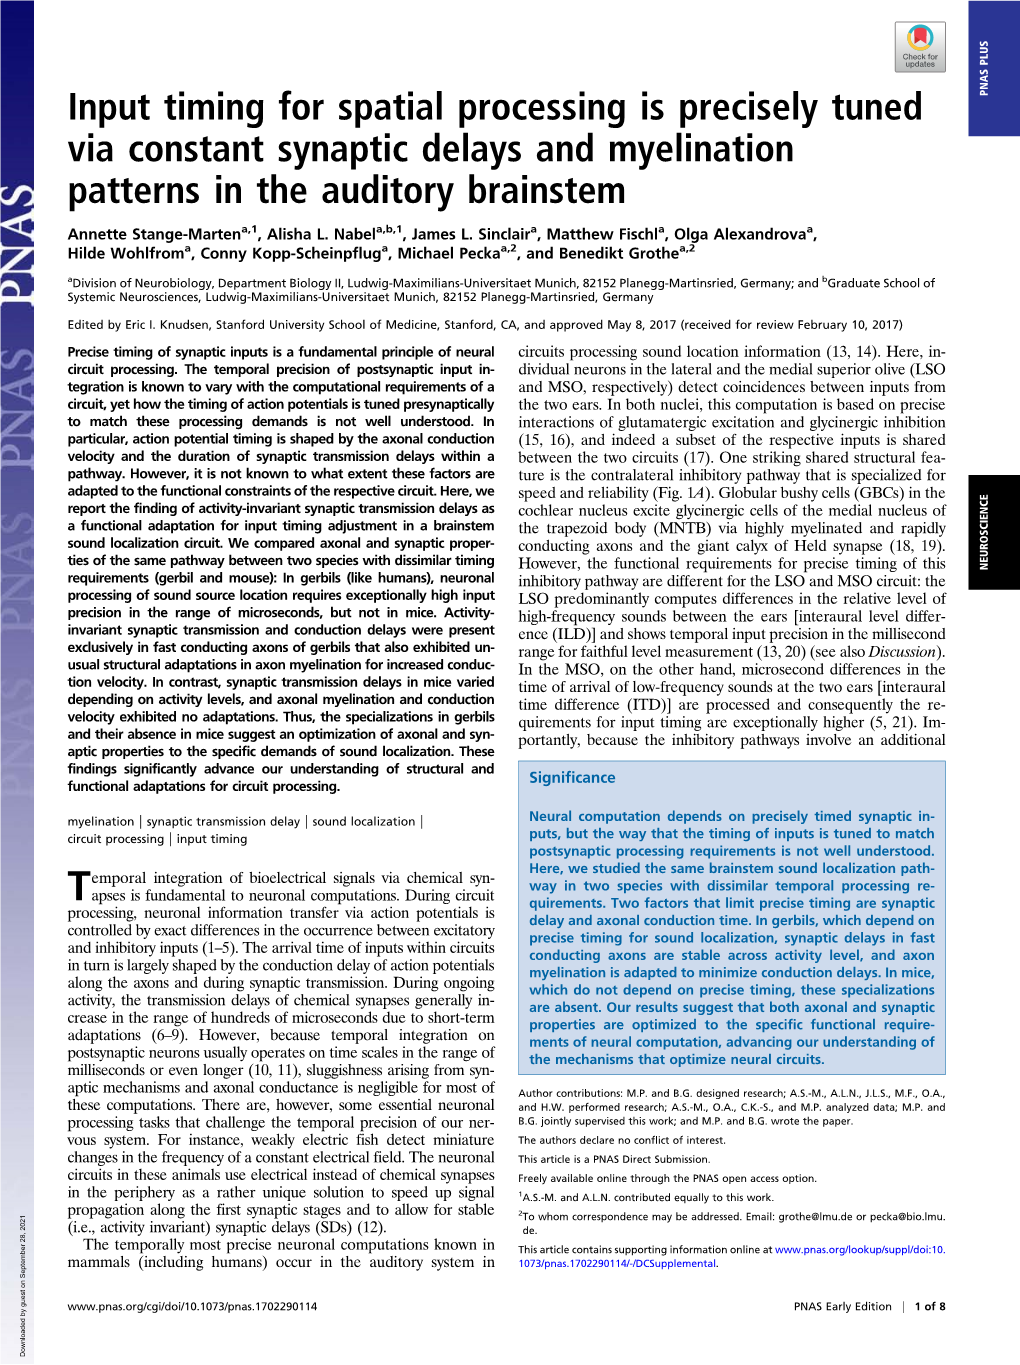 Input Timing for Spatial Processing Is Precisely Tuned Via Constant Synaptic Delays and Myelination Patterns in the Auditory